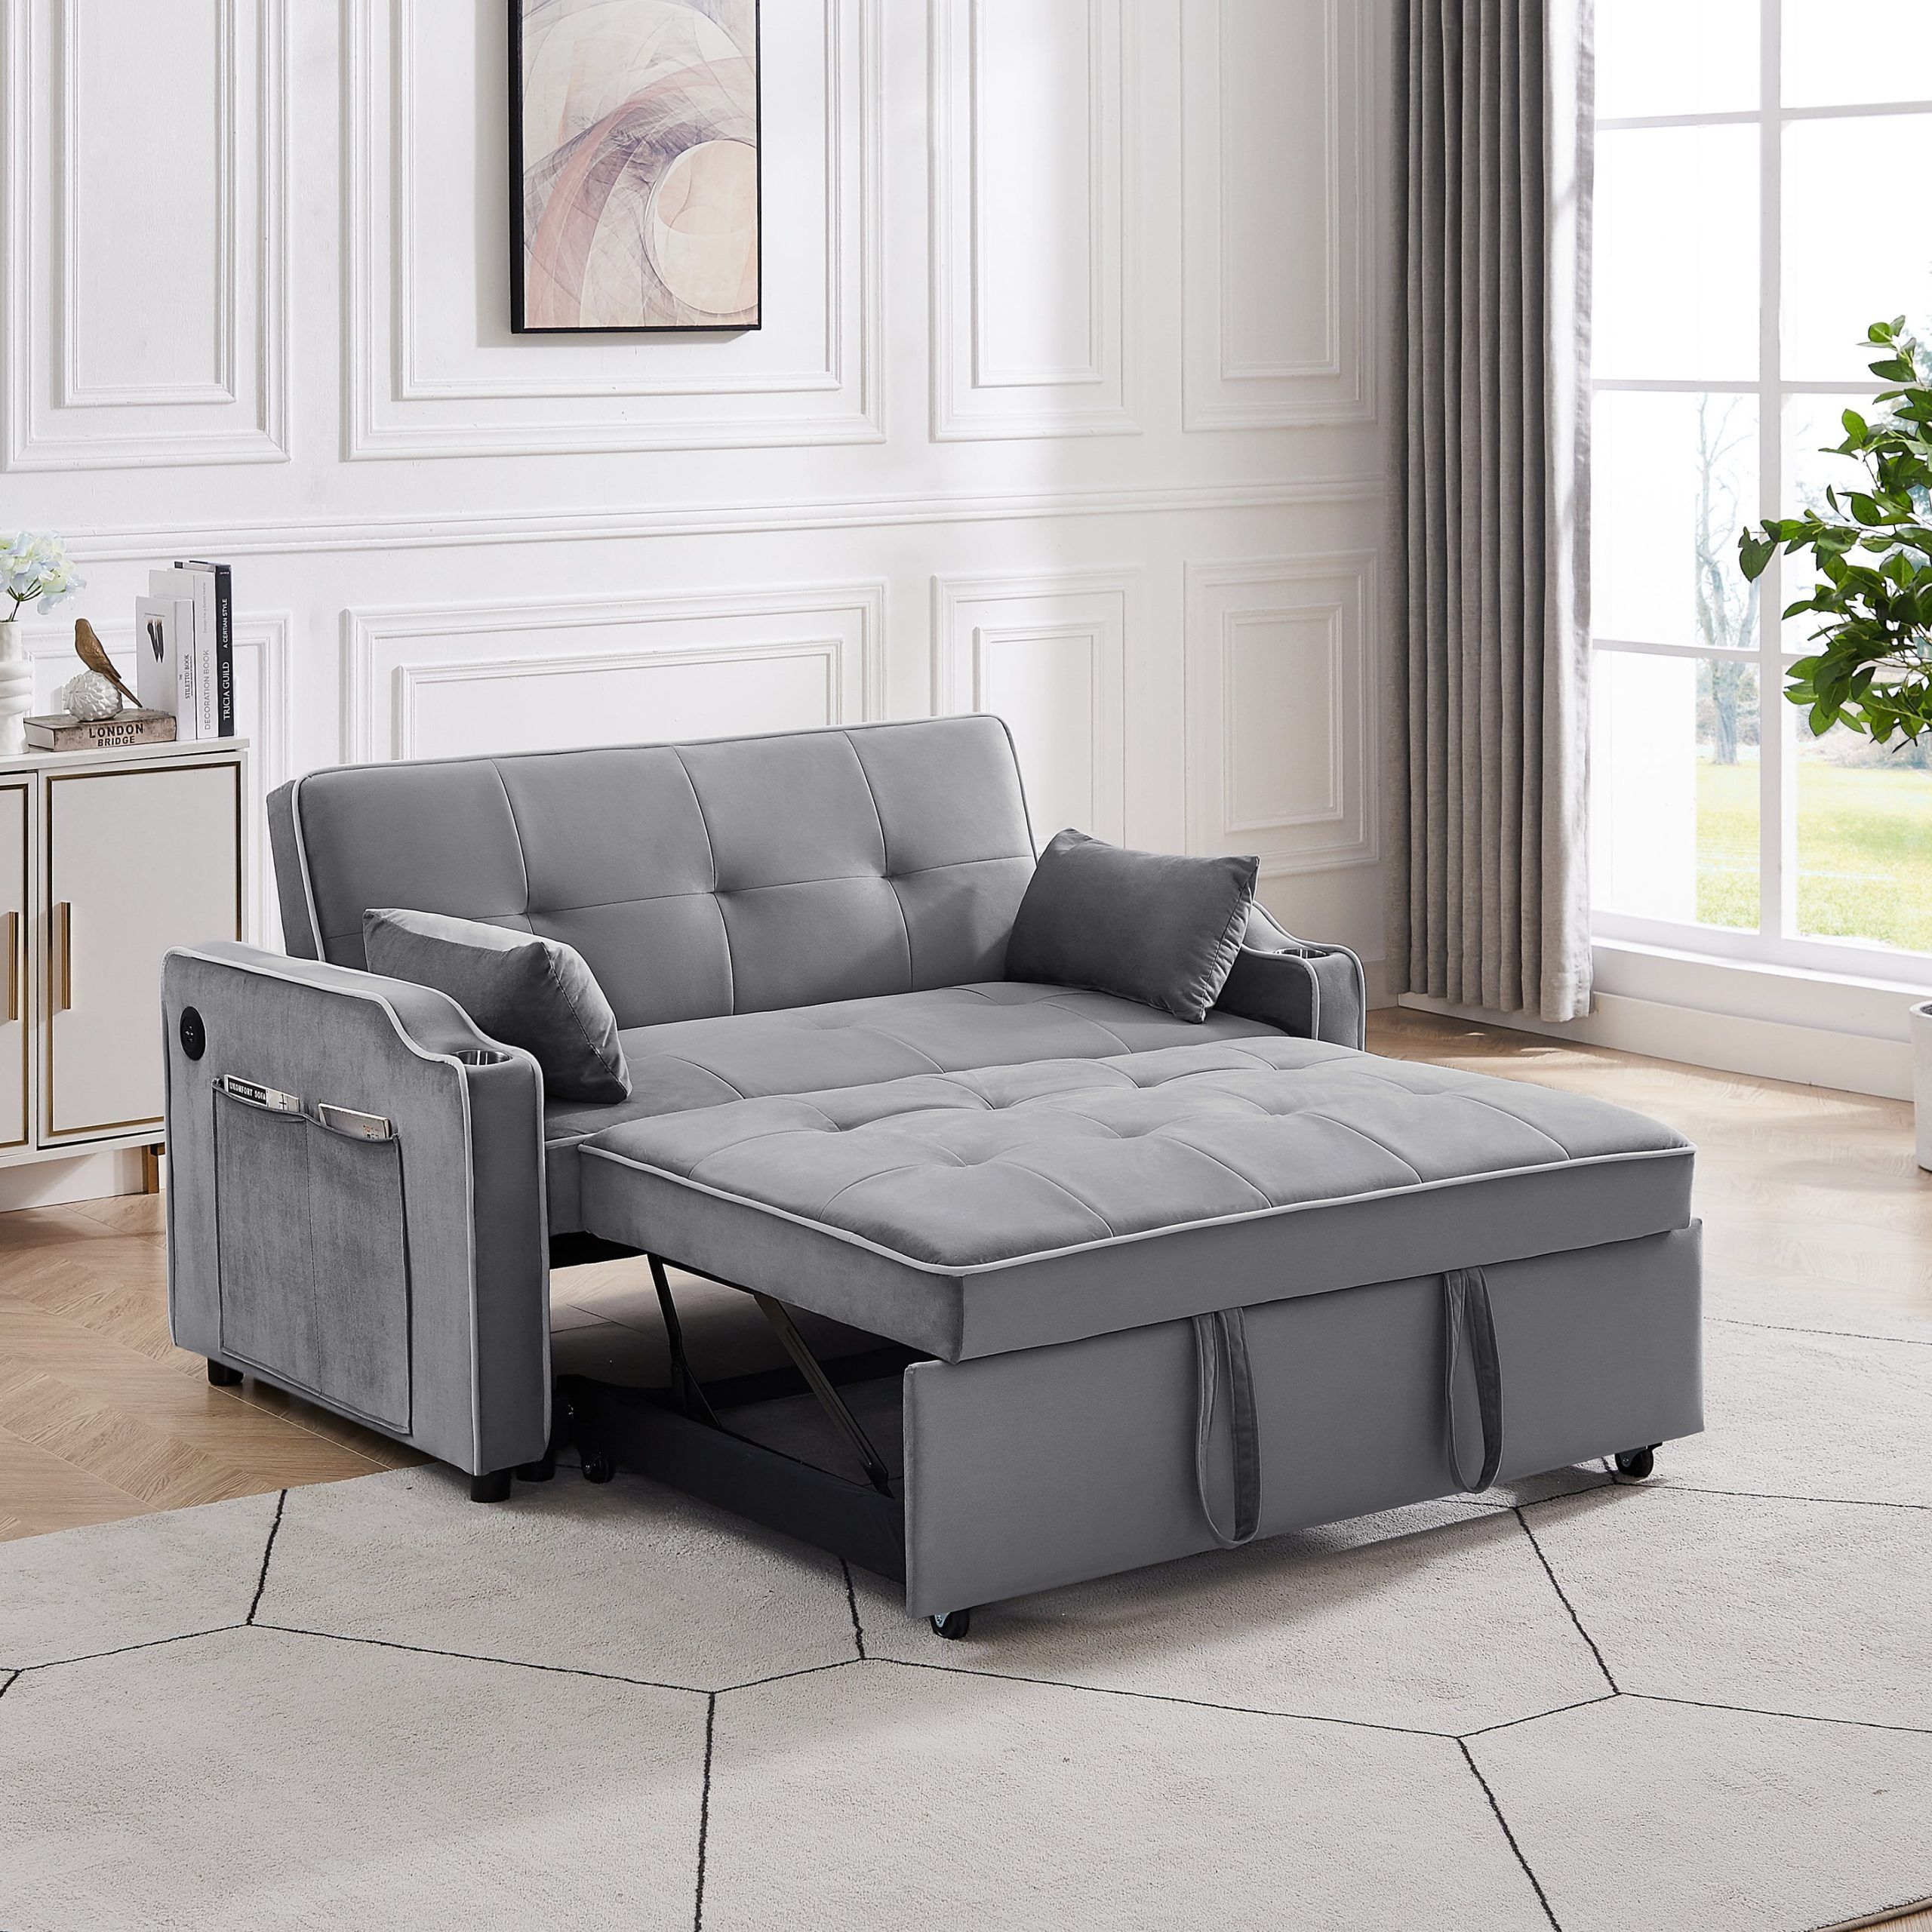 Momspeace Convertible Loveseat Sleeper With Cup Holders, Usb Ports And Side  Pockets, Gray – Walmart Inside Convertible Gray Loveseat Sleepers (View 3 of 15)